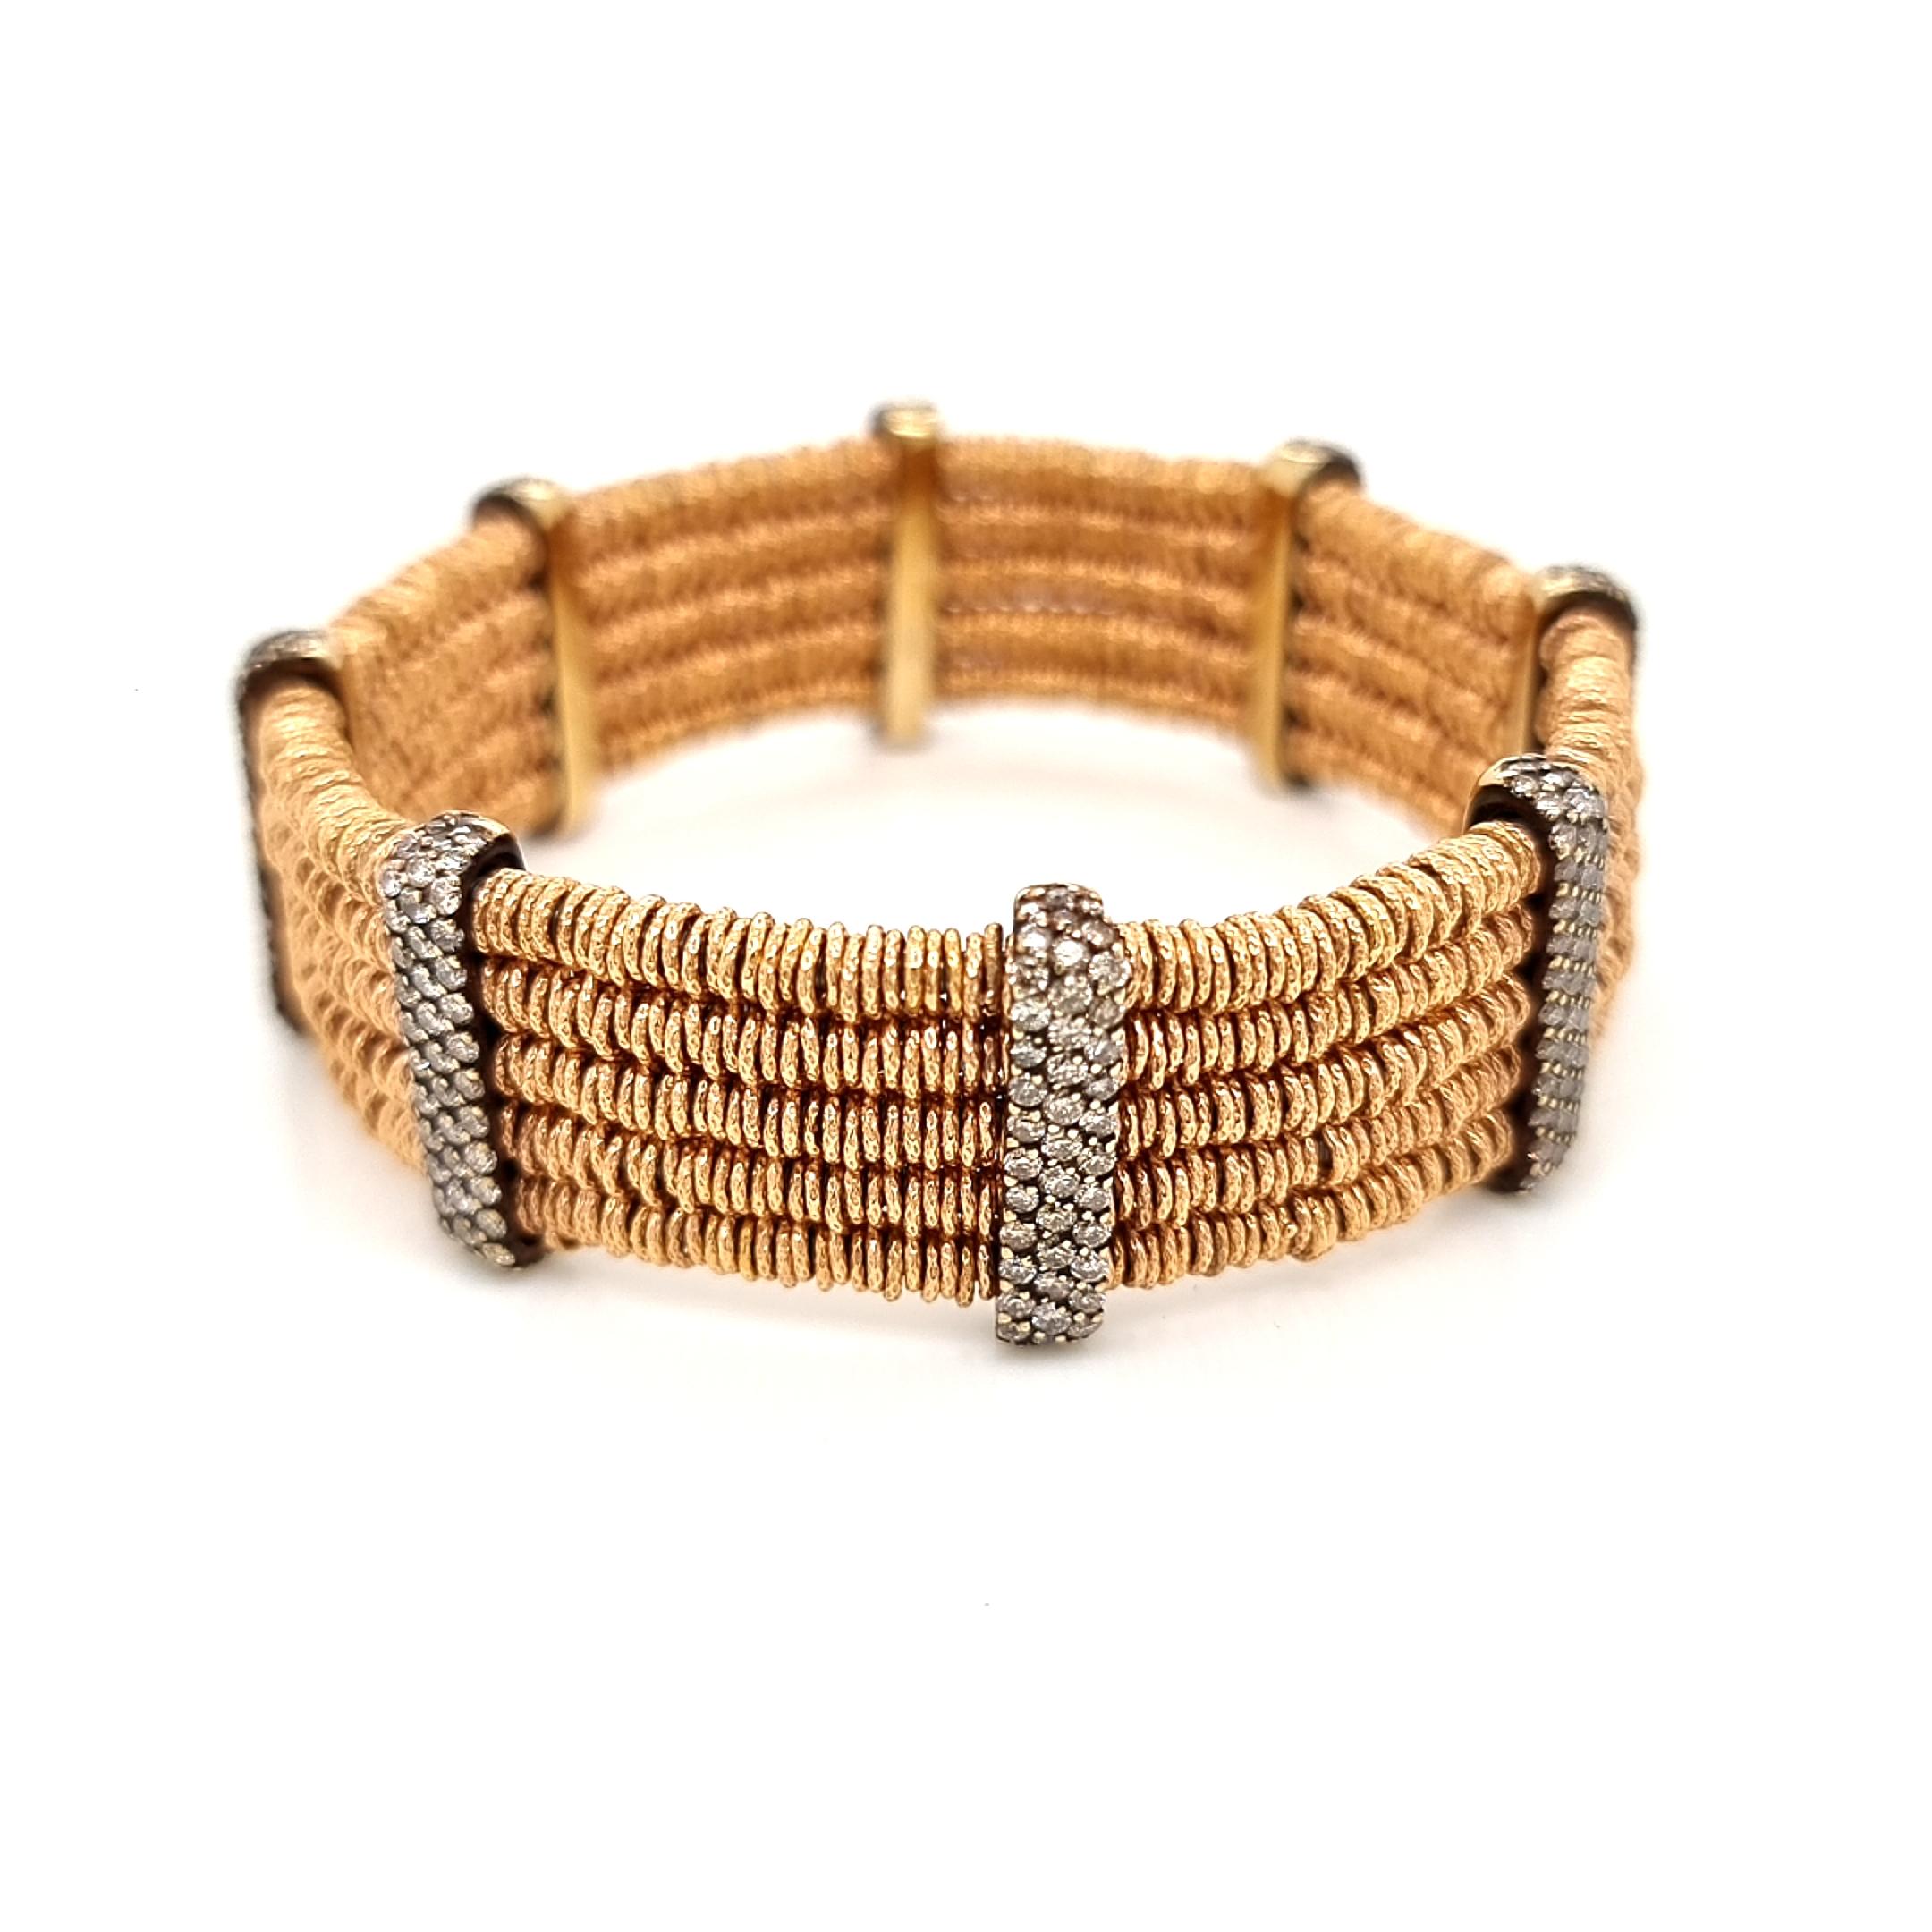 Experience the epitome of style with this designer bracelet, a masterpiece by Roberto Demeglio. Boasting a unique blend of stretchable steel insides and opulent 18K yellow gold elements adorned with encrusted brown diamonds, this bracelet exudes